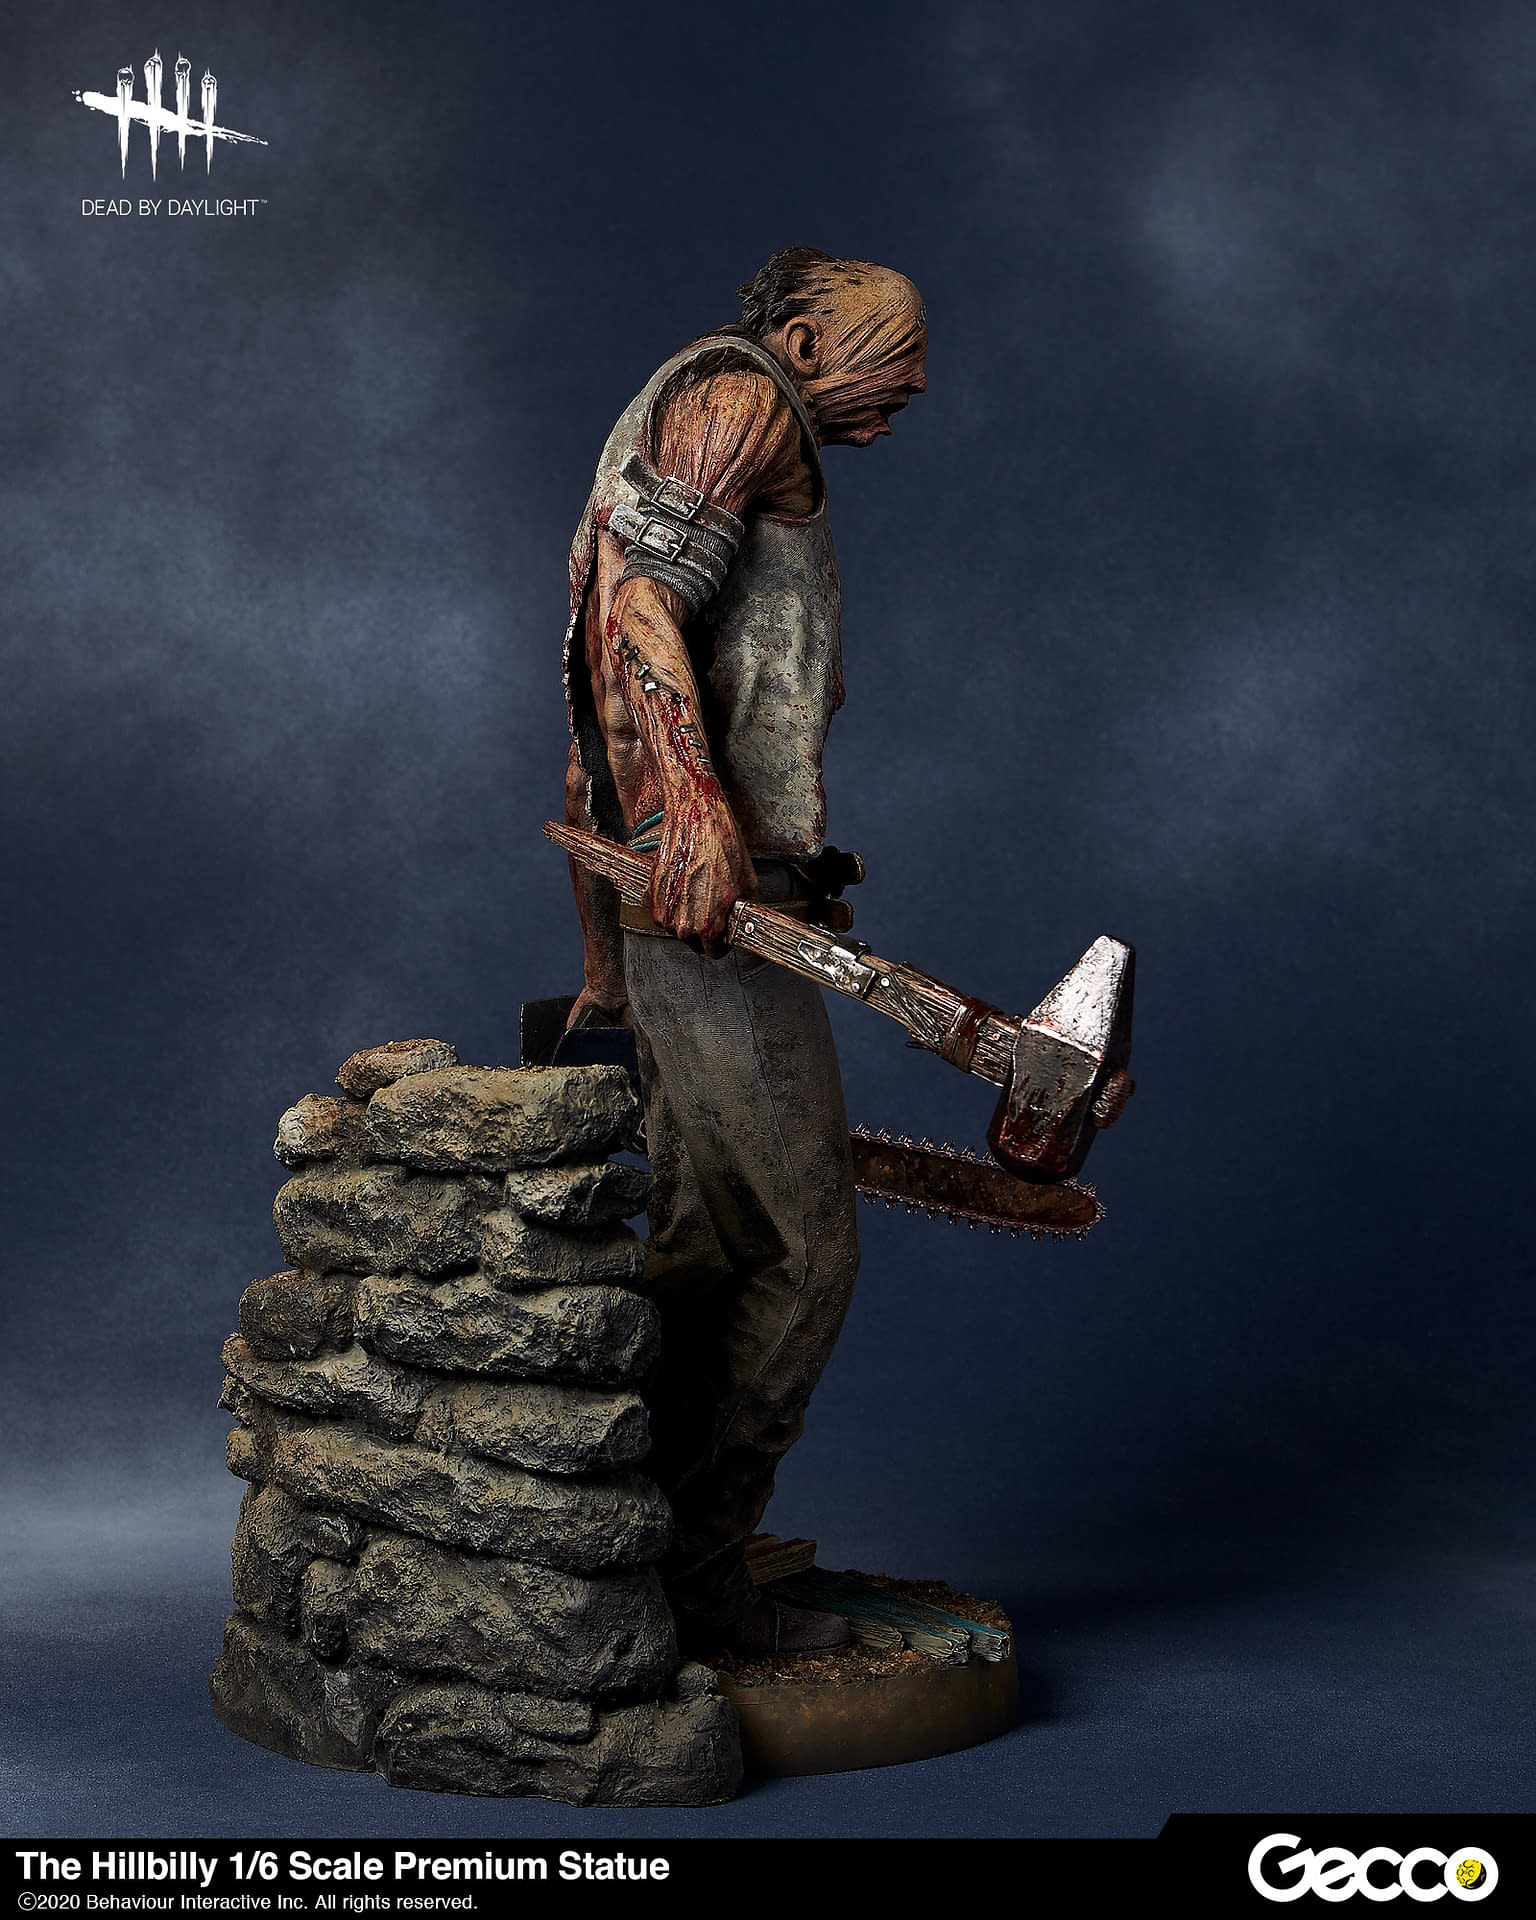 Gecco-Dead-by-Daylight-Hillbilly-Statue-004